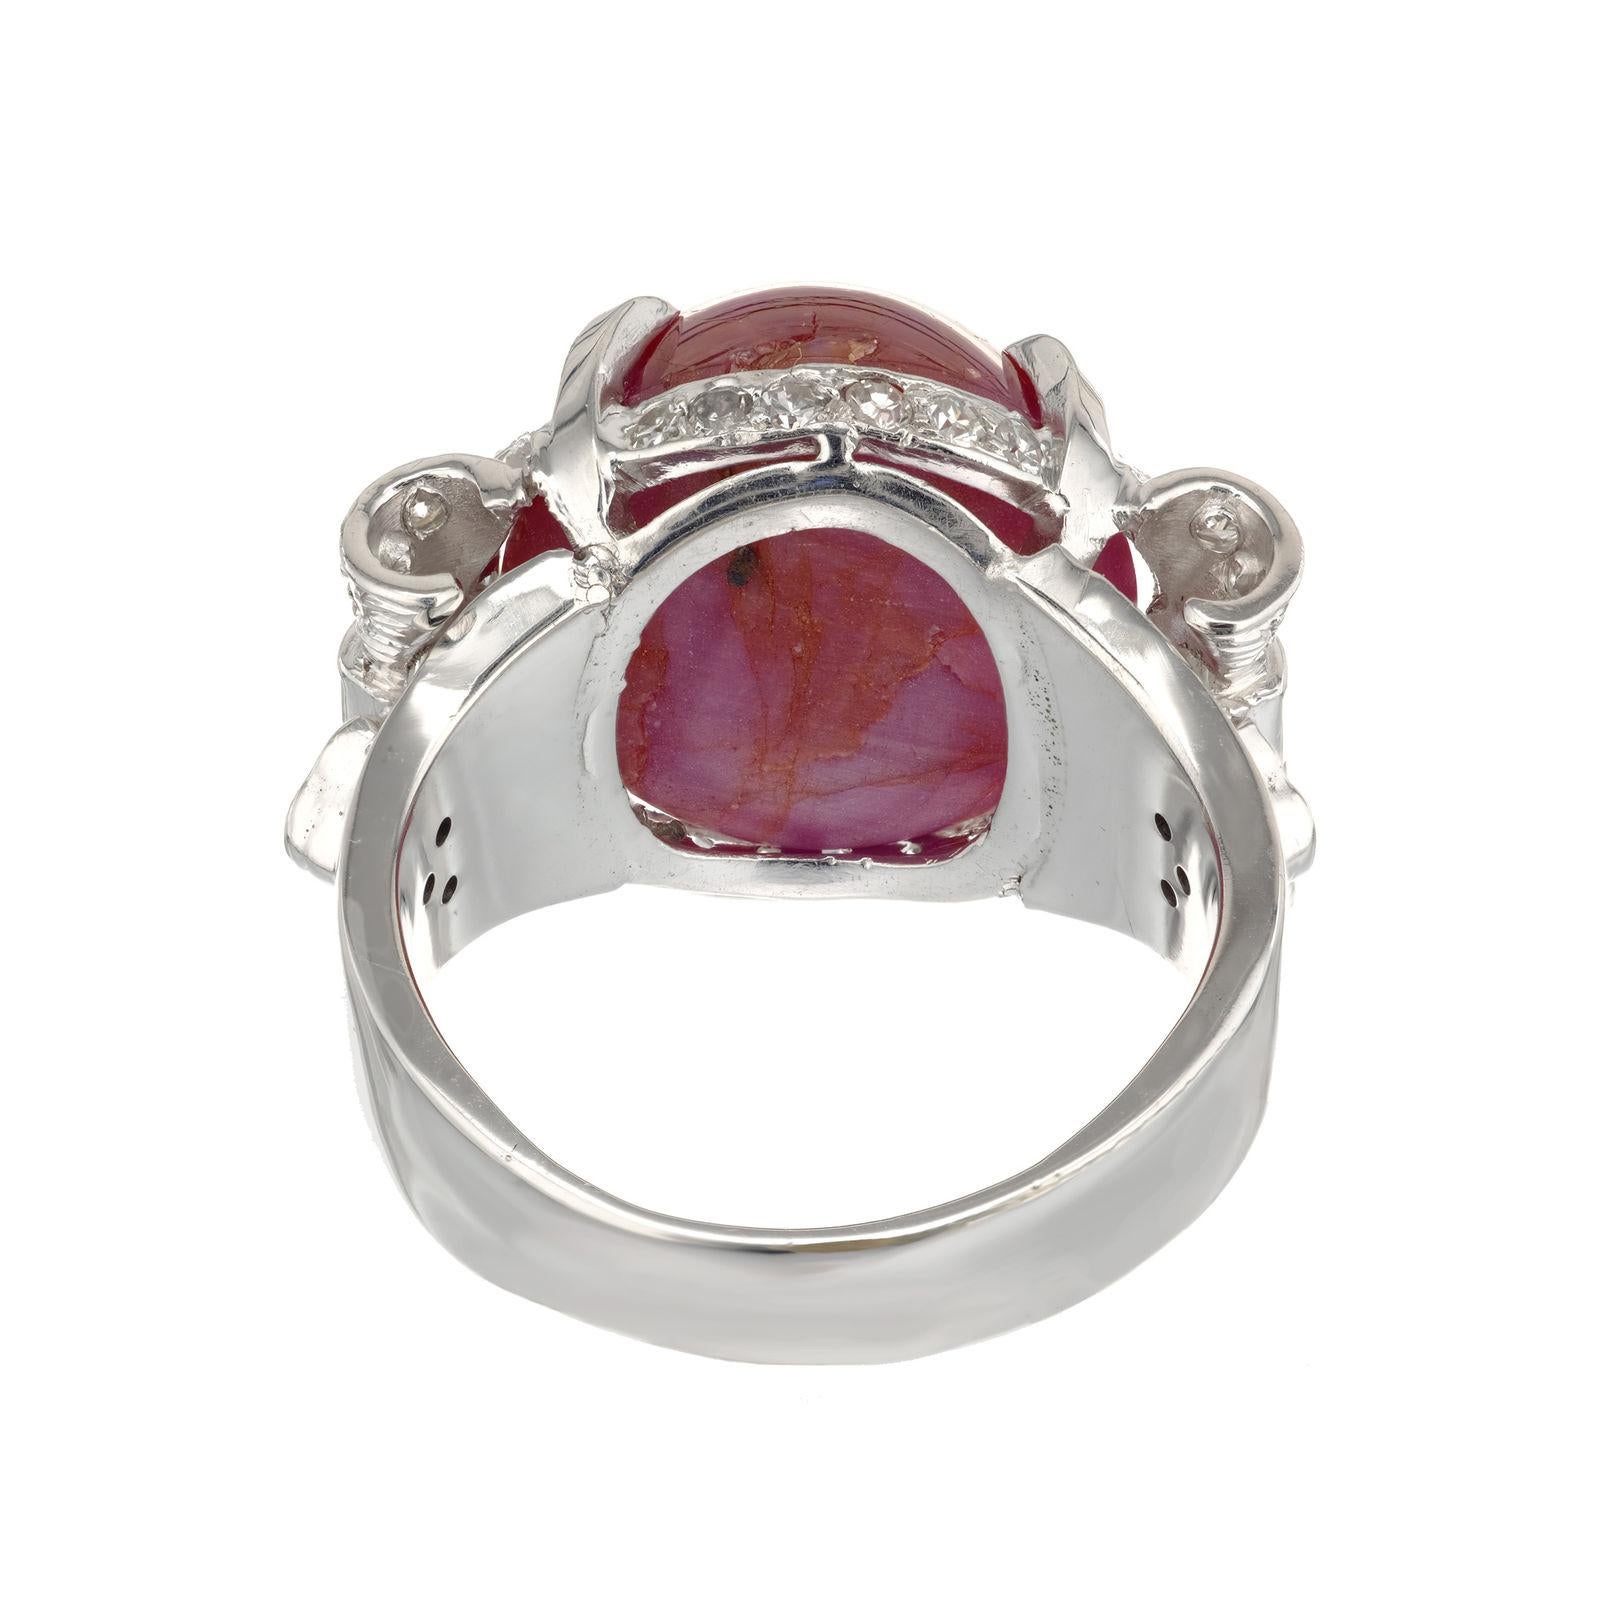 Round Cut GIA Certified 24.88 Carat Star Ruby Diamond White Gold Art Deco Cocktail Ring For Sale